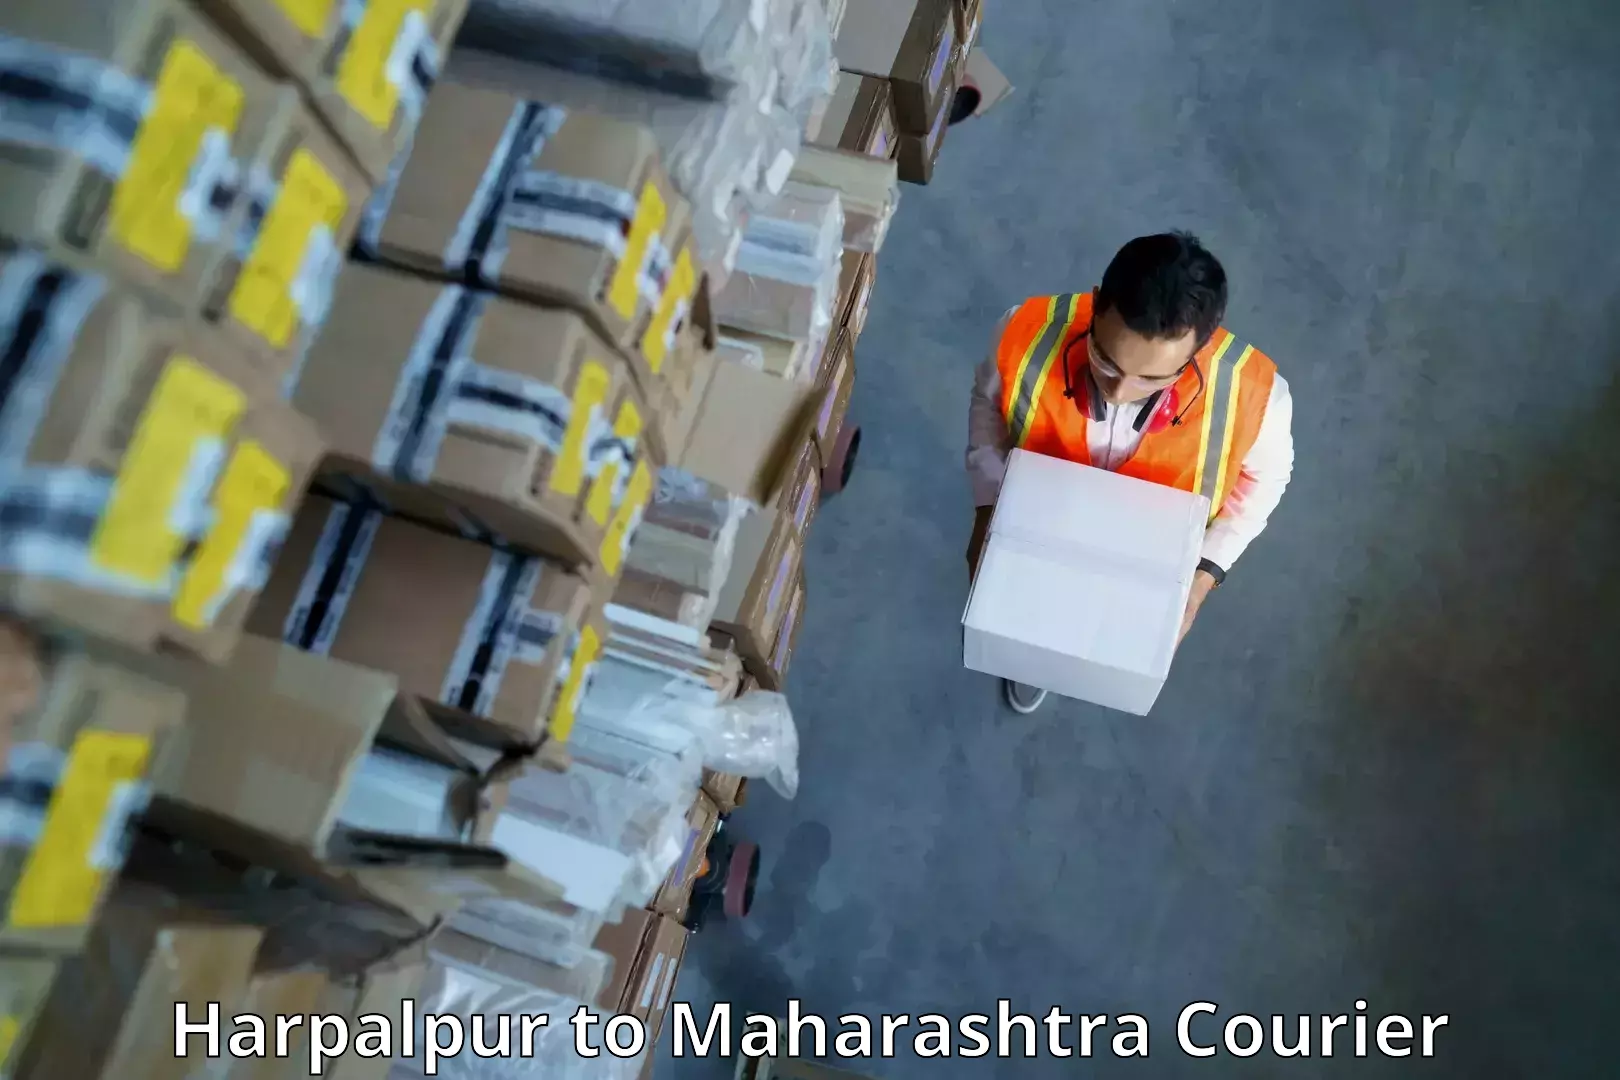 Courier service partnerships Harpalpur to Shirdi